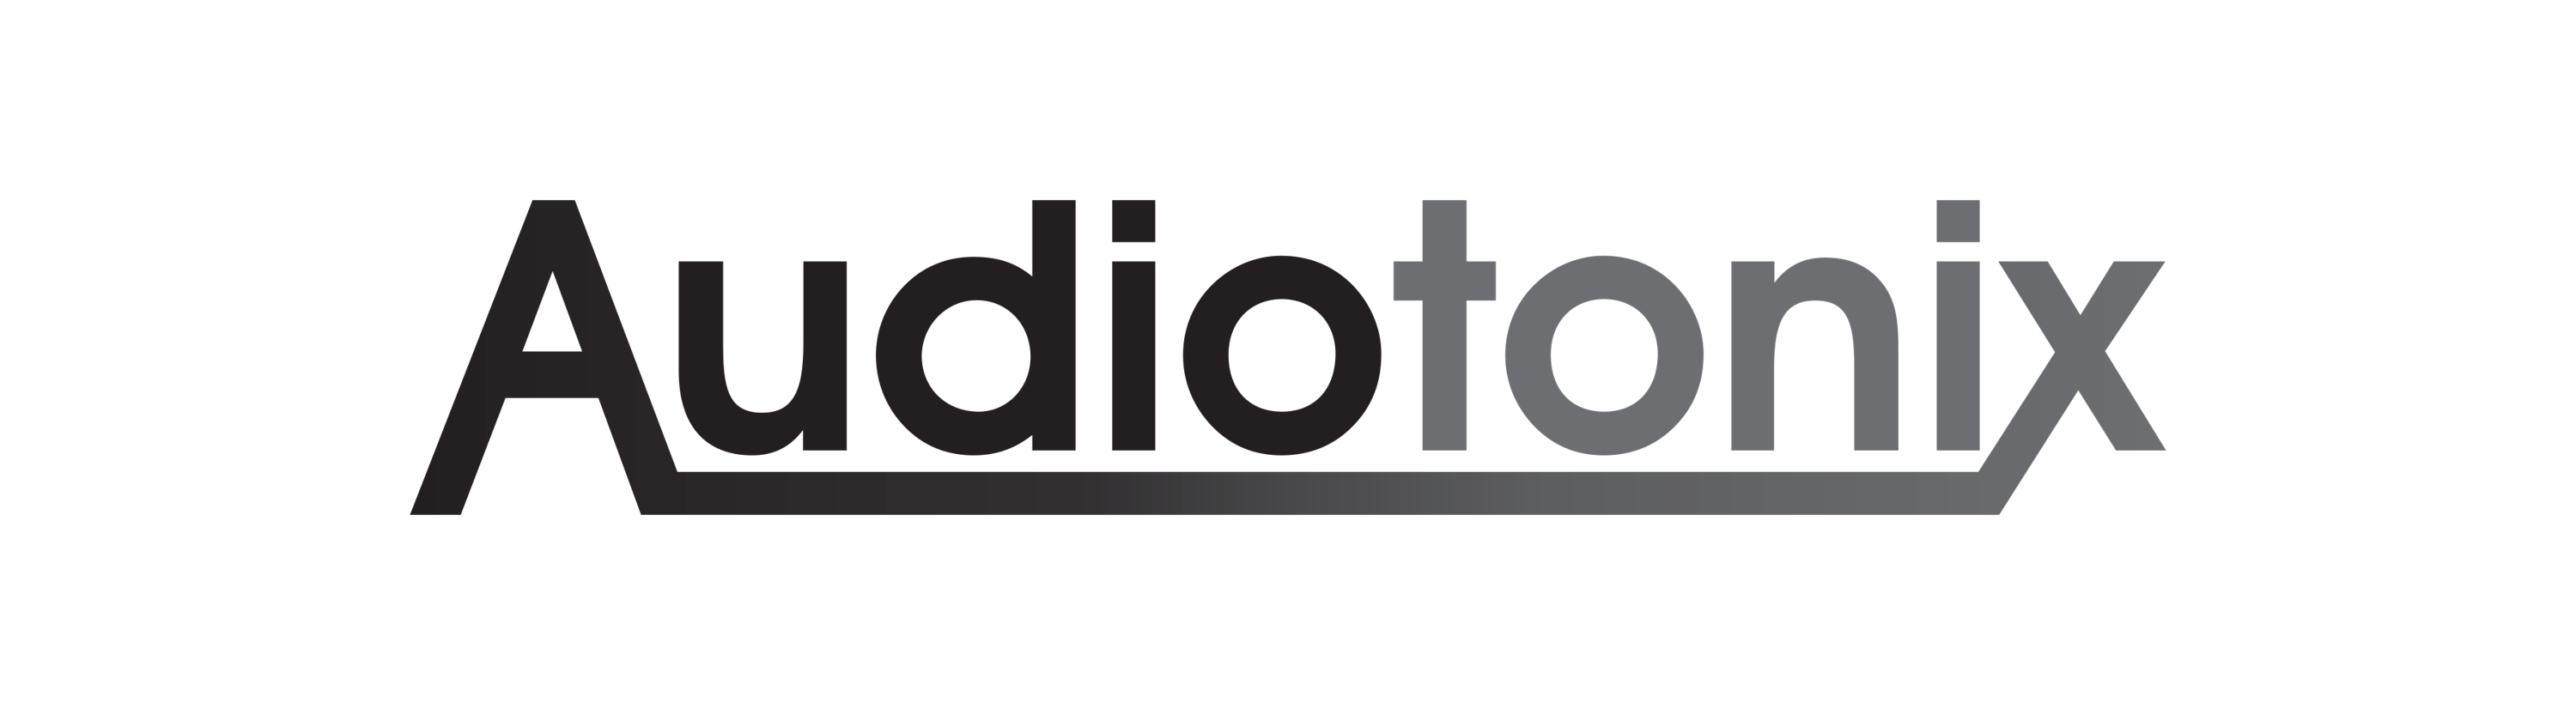 Audiotonix Gets Even More Creative with Slate Digital Acquisition